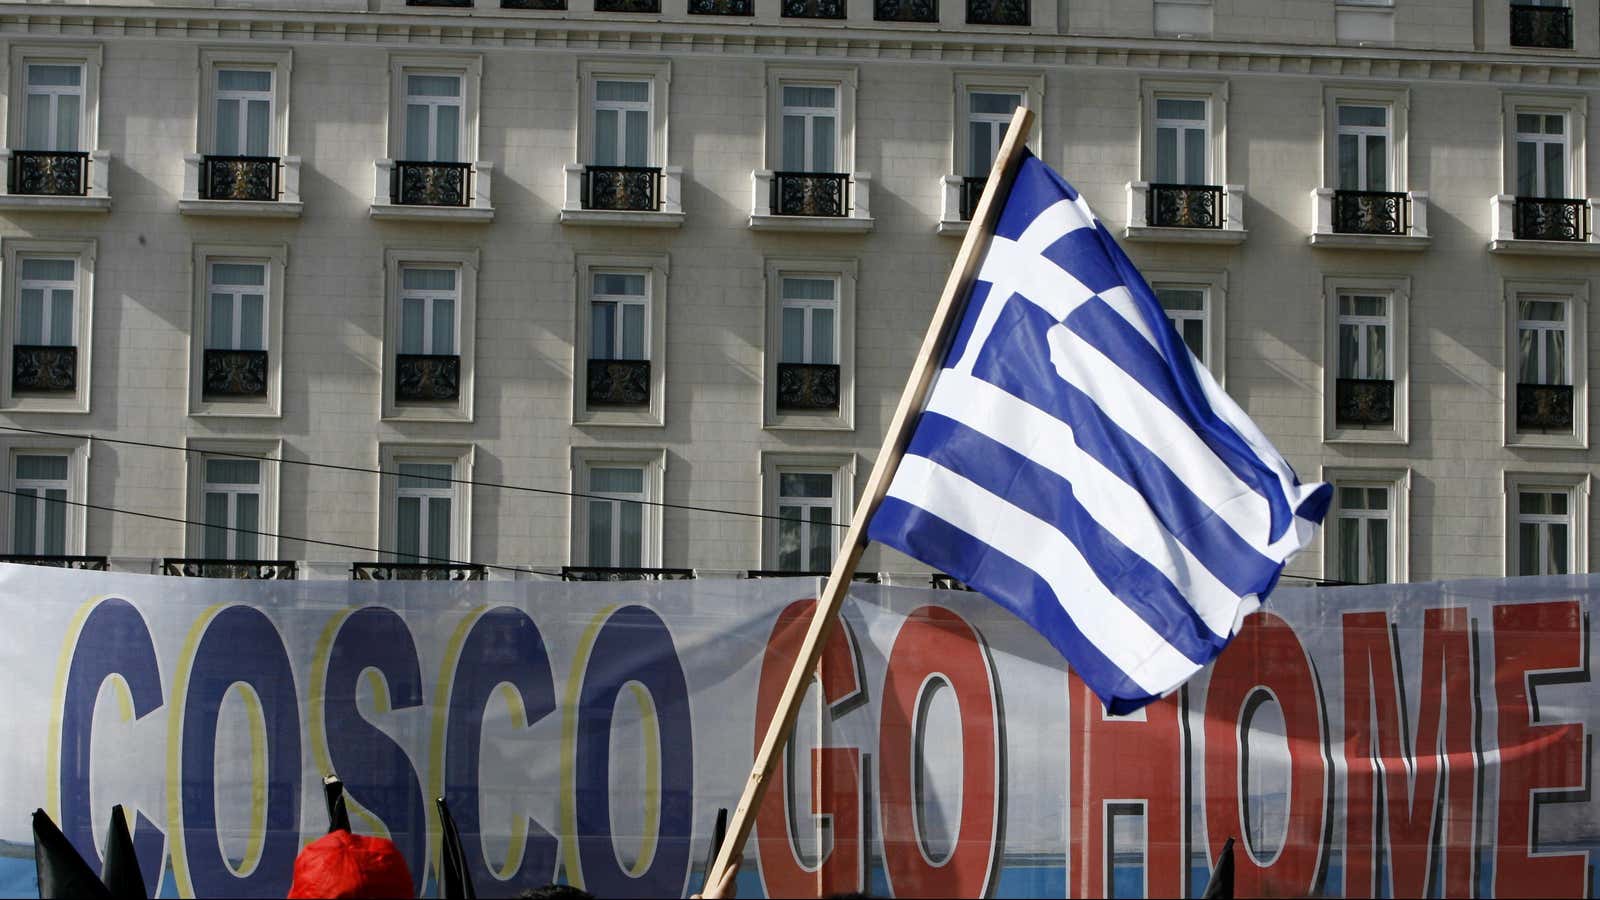 Since 2008, Chinese state-owned company Cosco Shipping Ports has taken control of ports in Greece, Belgium, and Spain. Locals and EU authorities worry about what new opportunities this crisis may provide.